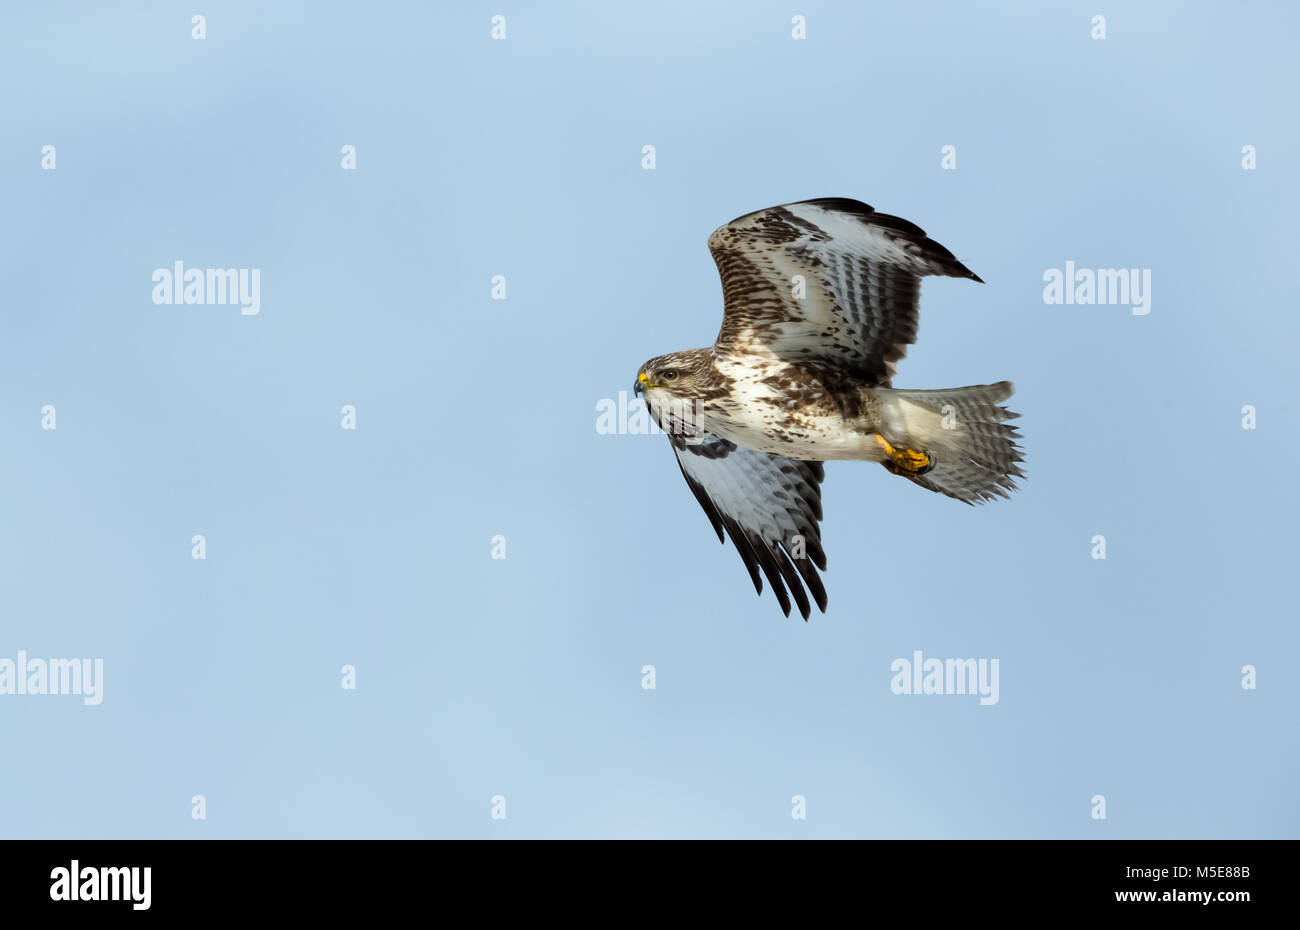 Common Buzzard flying on the Isle of Mull, Argyll, Scotland against a bright blue background Stock Photo